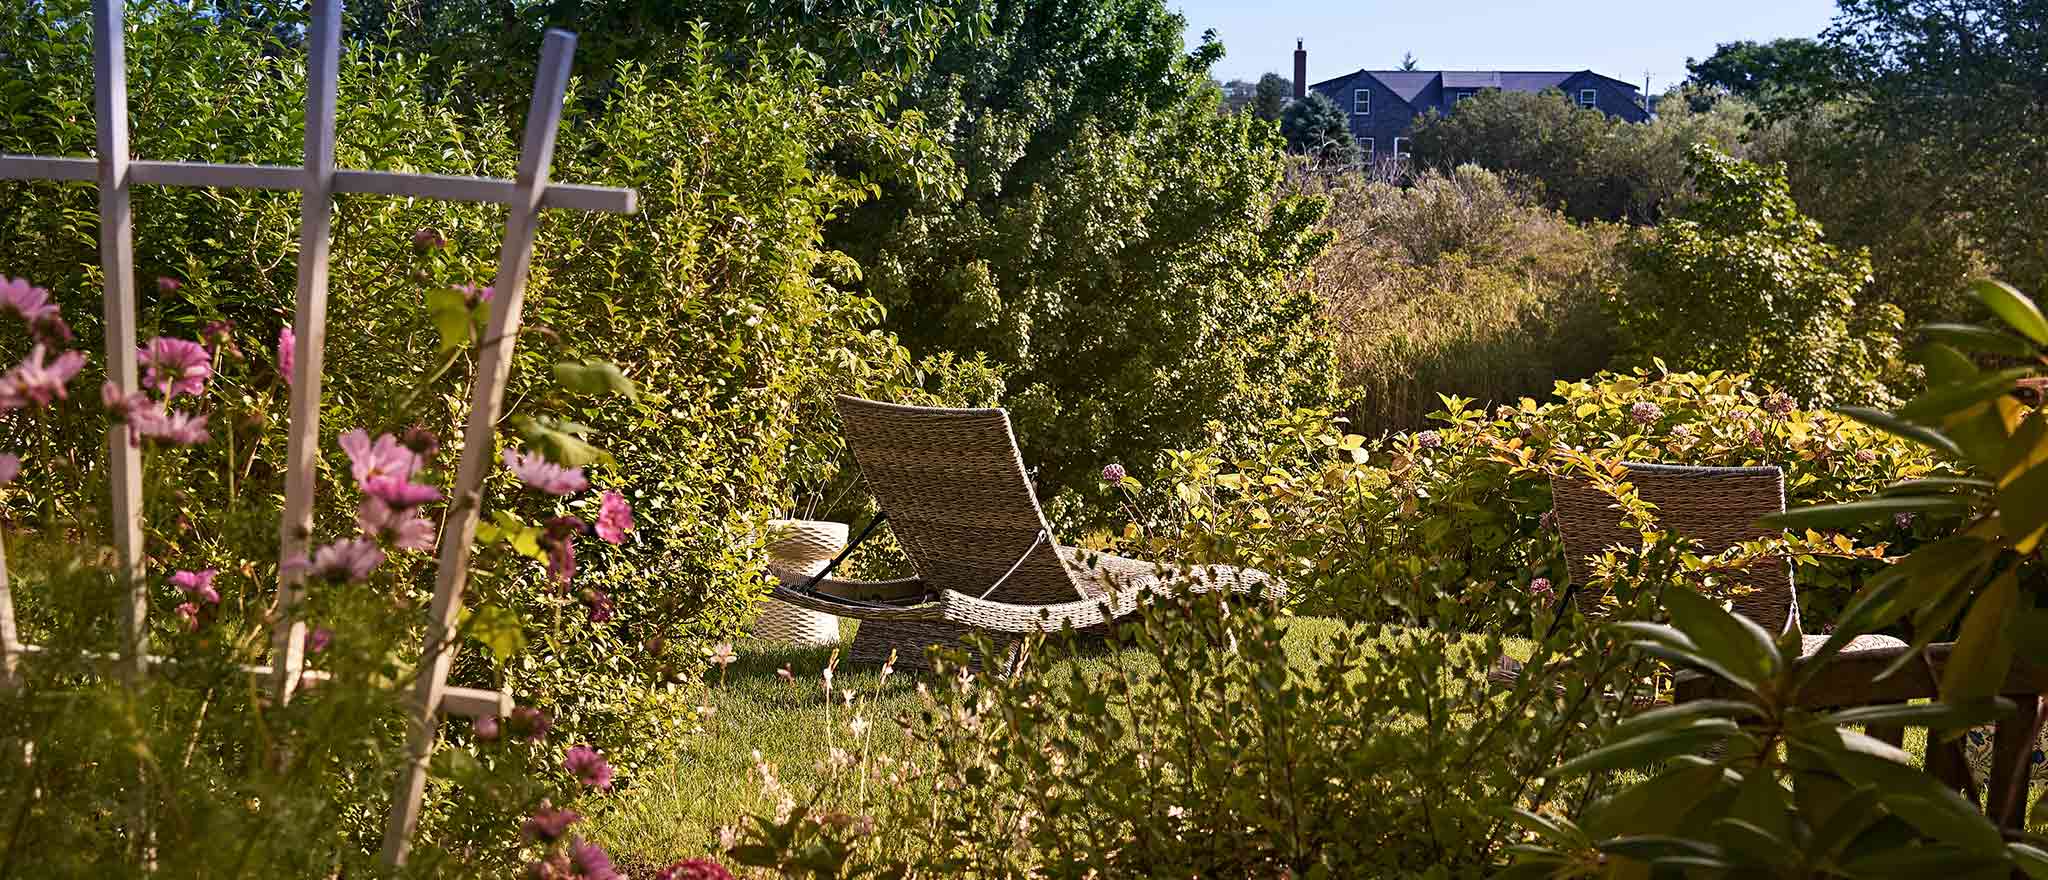 A wicker chaise lounge in the garden surrounded by grass and flowers